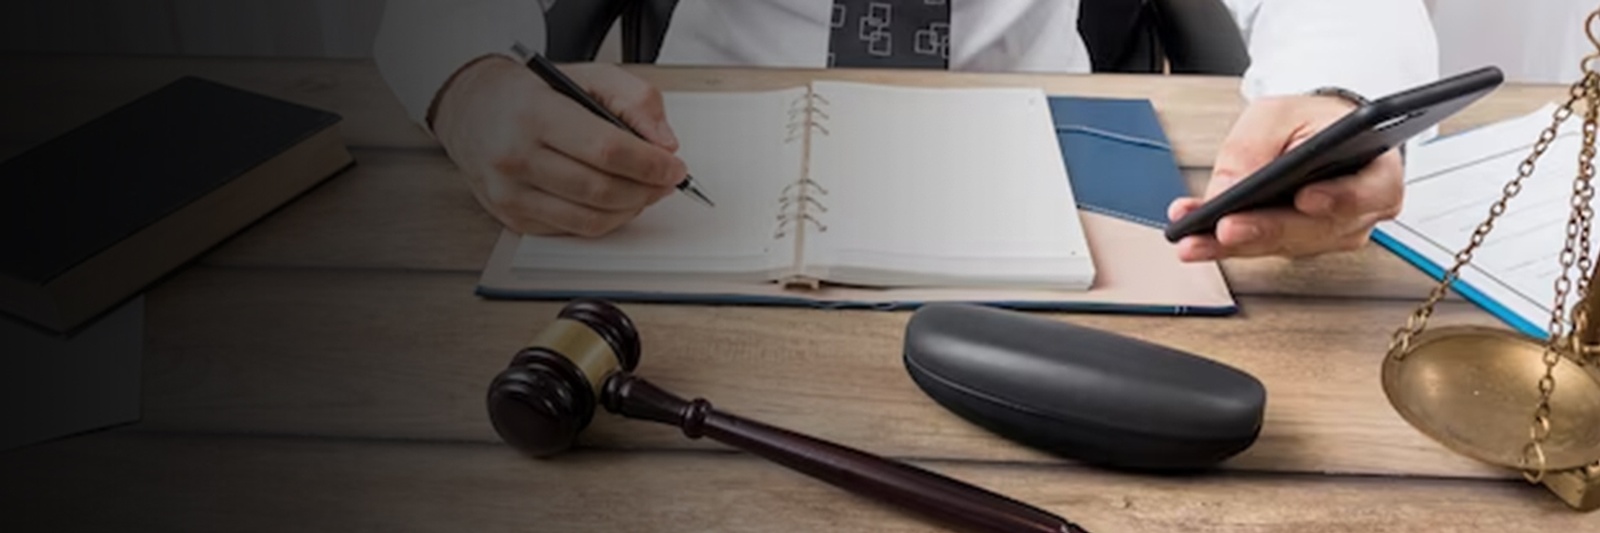 Facing Criminal Charges? Get the Legal Support from Vaughan’s Criminal Lawyer